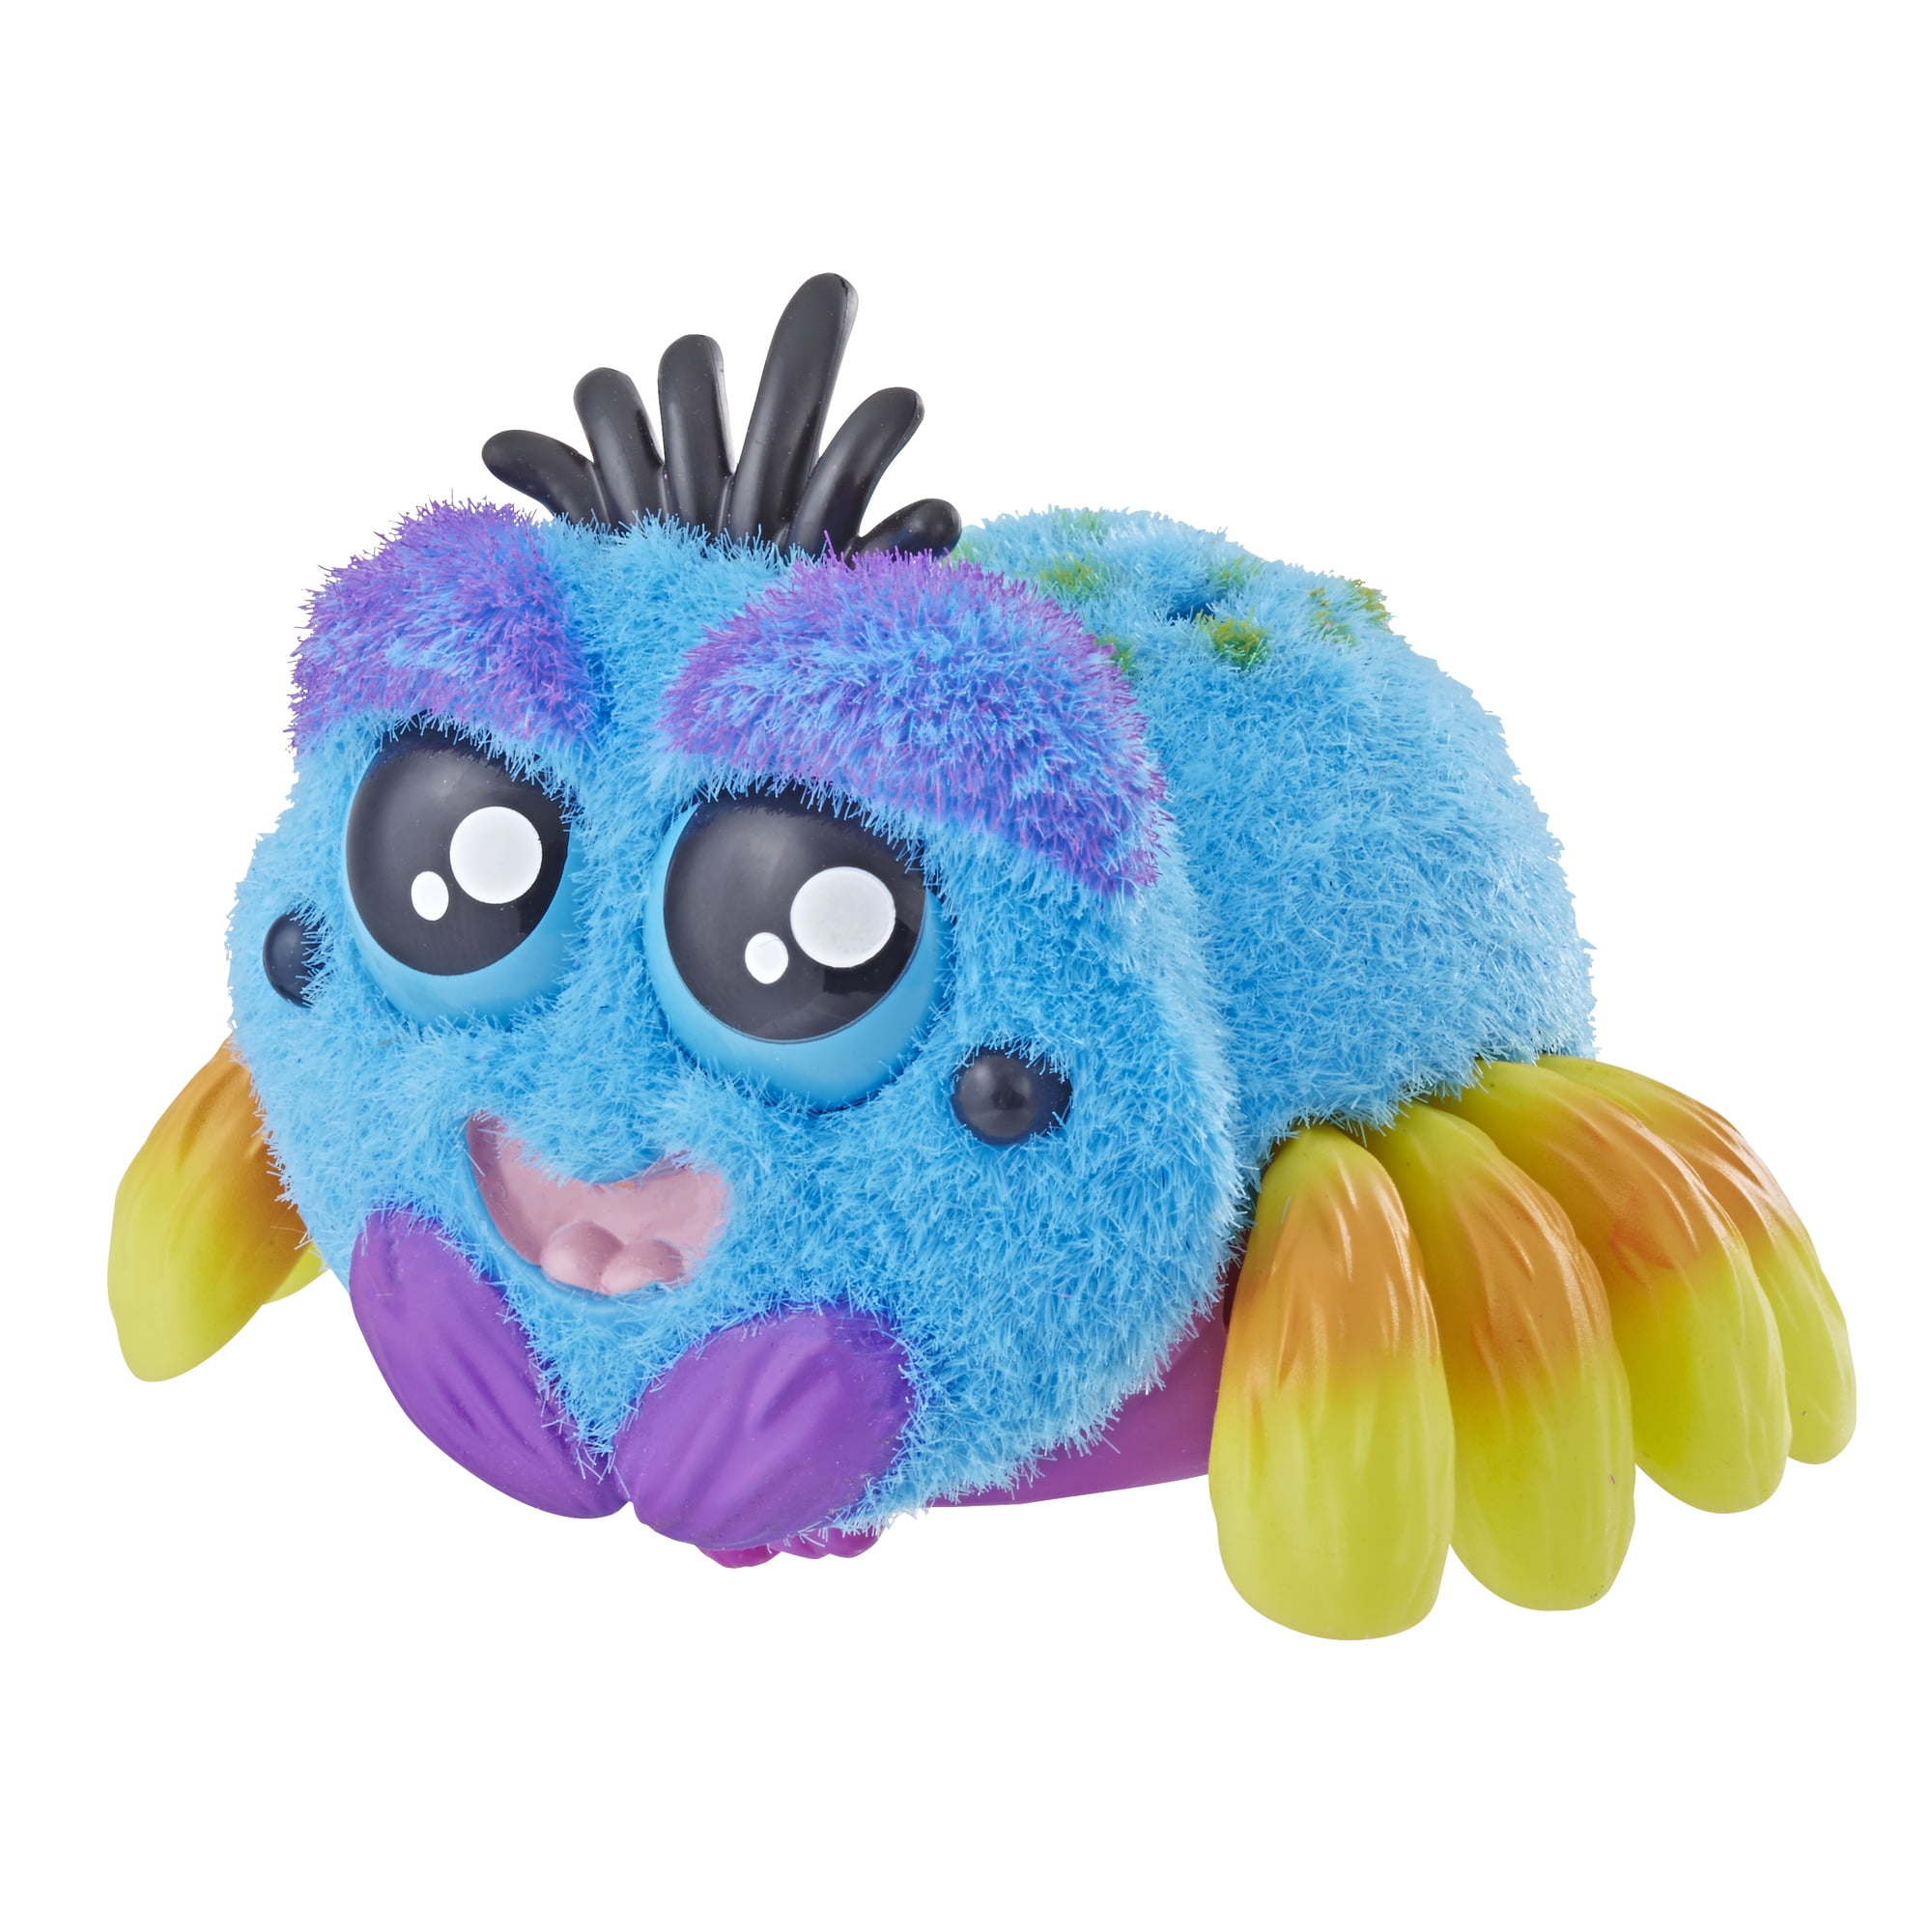 Yellies Toots Voice-activated Spider Pet Ages 5 and up for sale online 